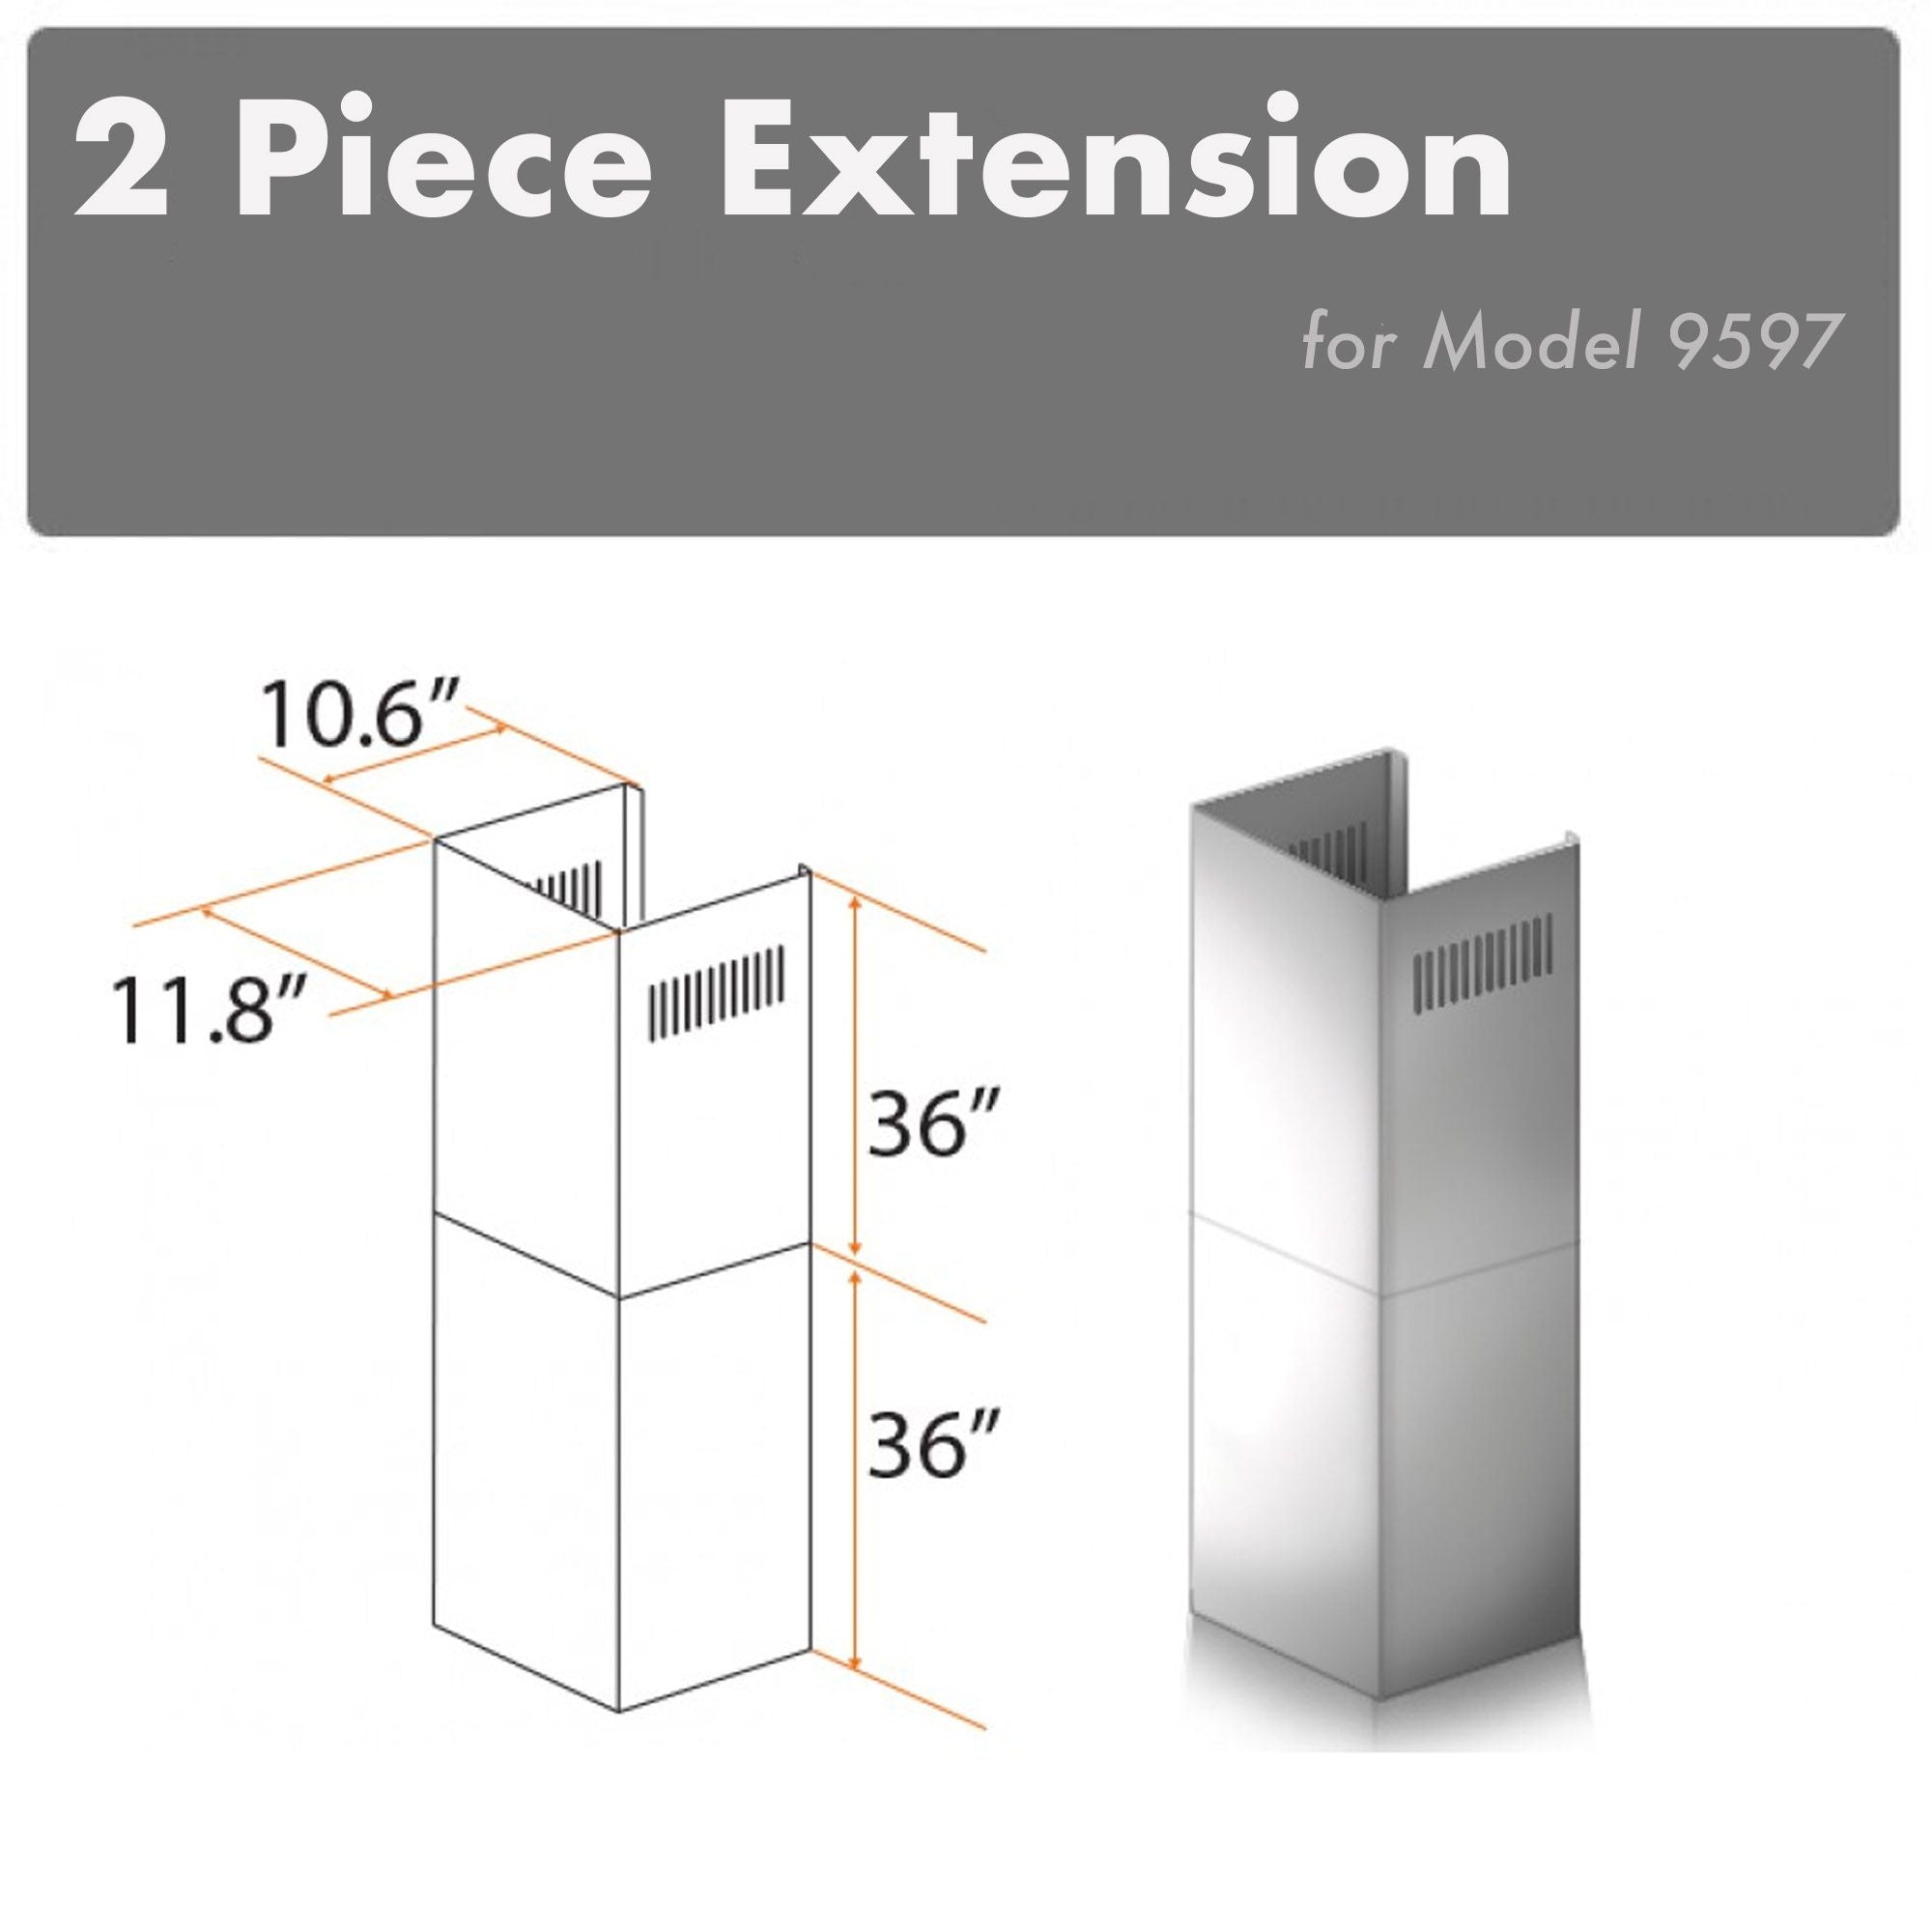 ZLINE 2-36" Chimney Extensions for 10 ft. to 12 ft. Ceilings (2PCEXT-9597)